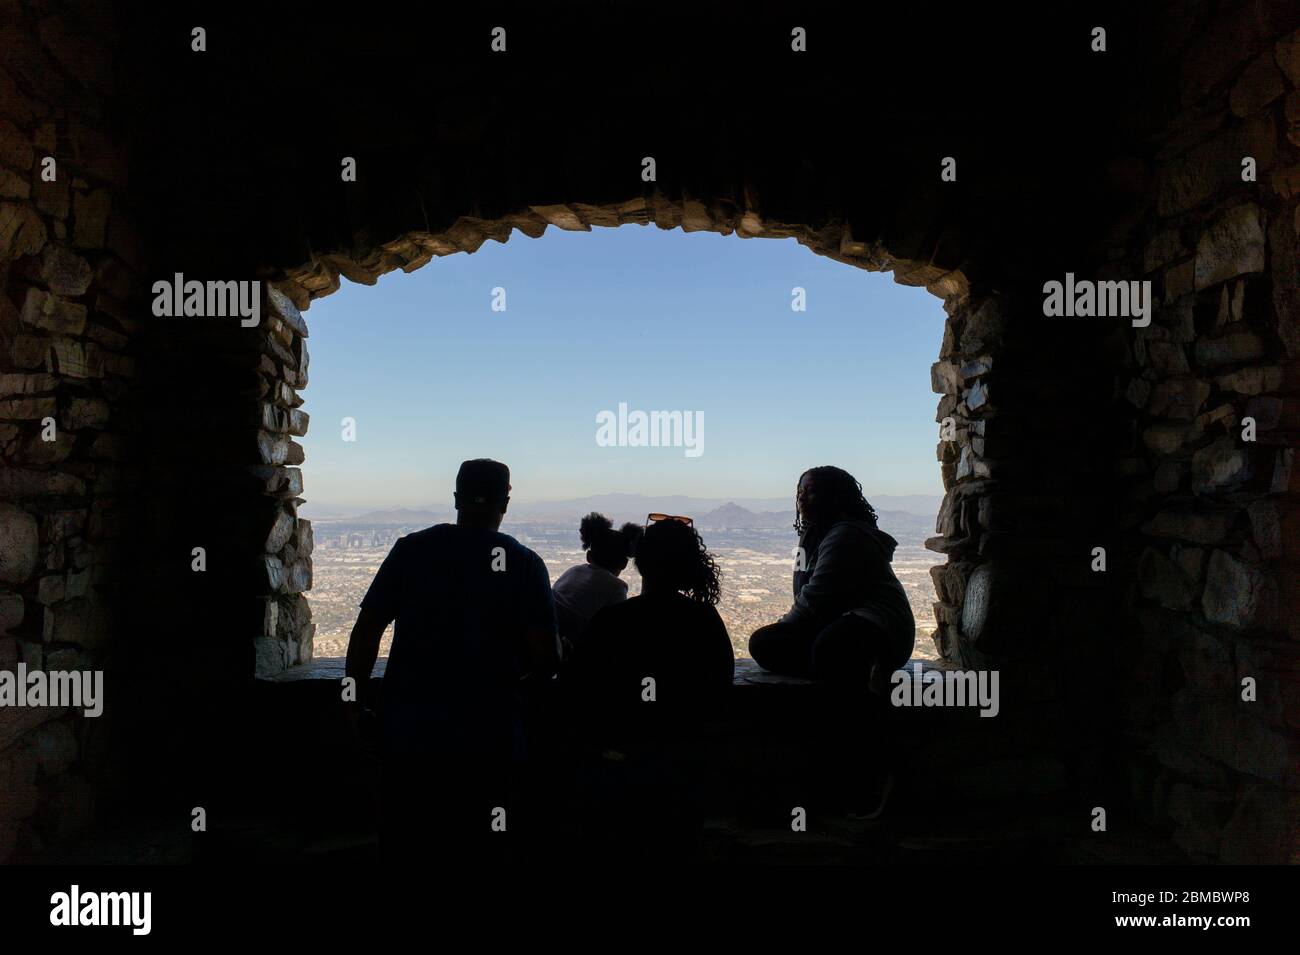 Family silhouetted looking out opening in rock wall over Phoenix Stock Photo